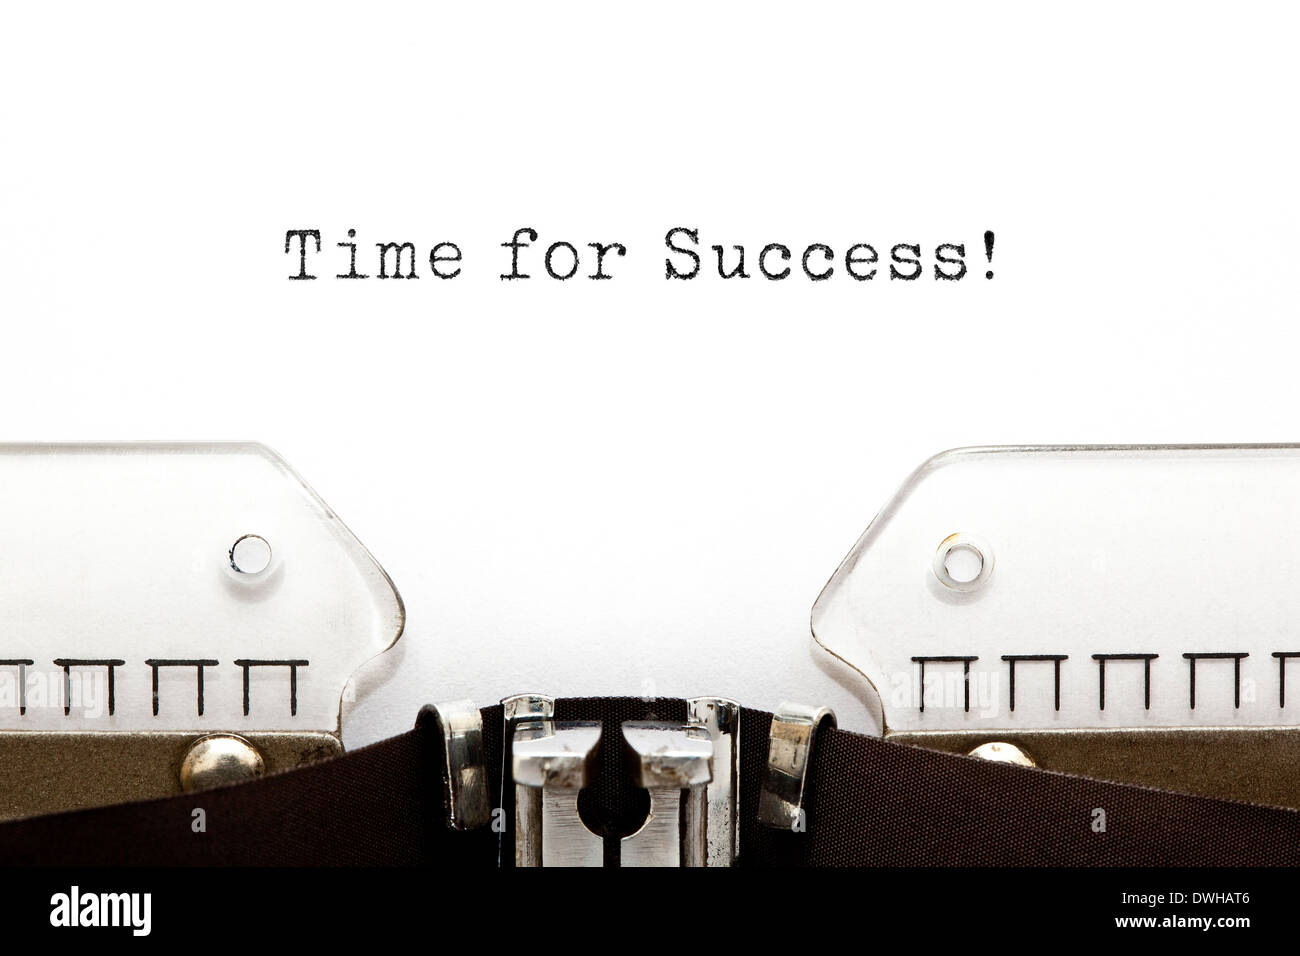 Time For Success printed on an old typewriter. Stock Photo